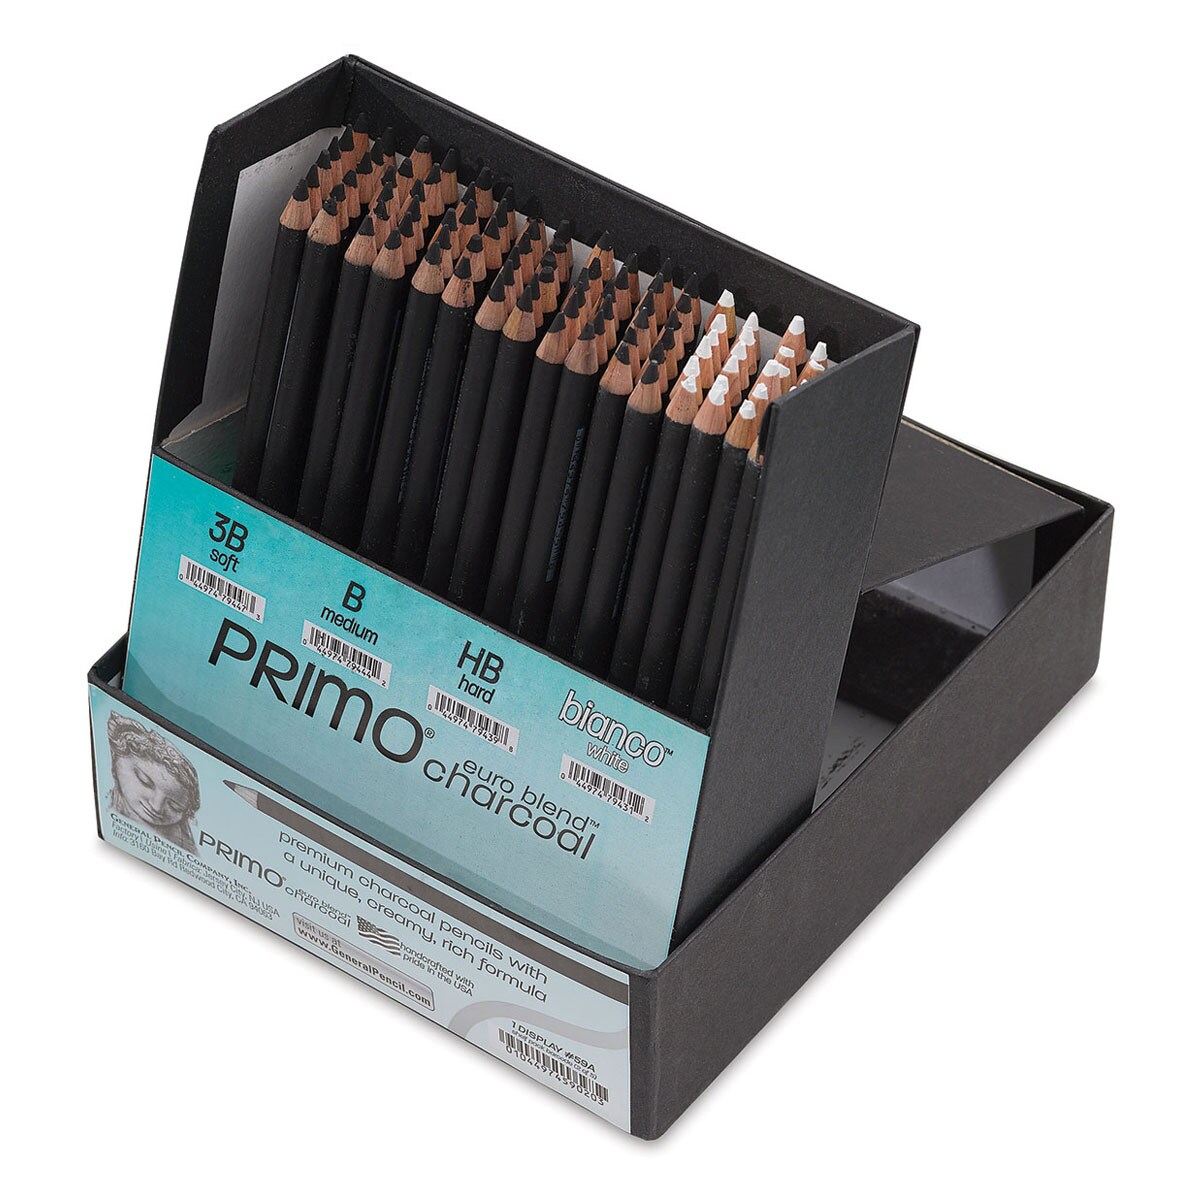 General's Primo Euro Charcoal Pencils and Sets